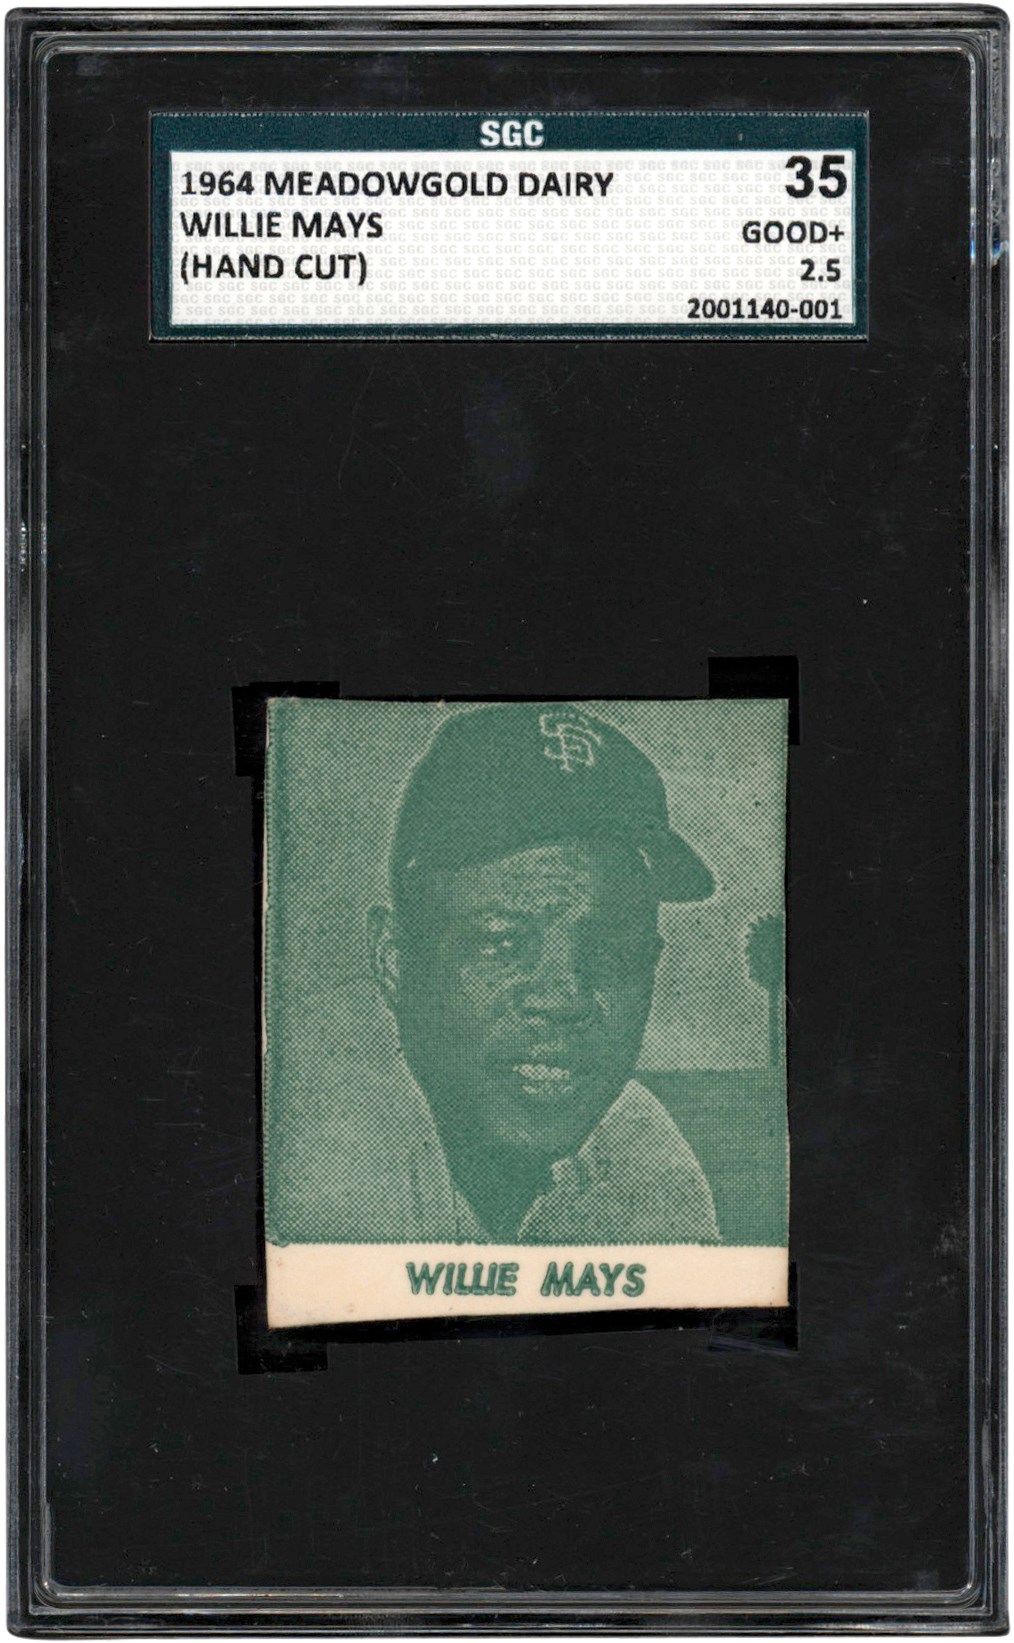 - 1964 Meadowgold Dairy Willie Mays SGC GD+ 2.5 (Pop 1 Two Higher)